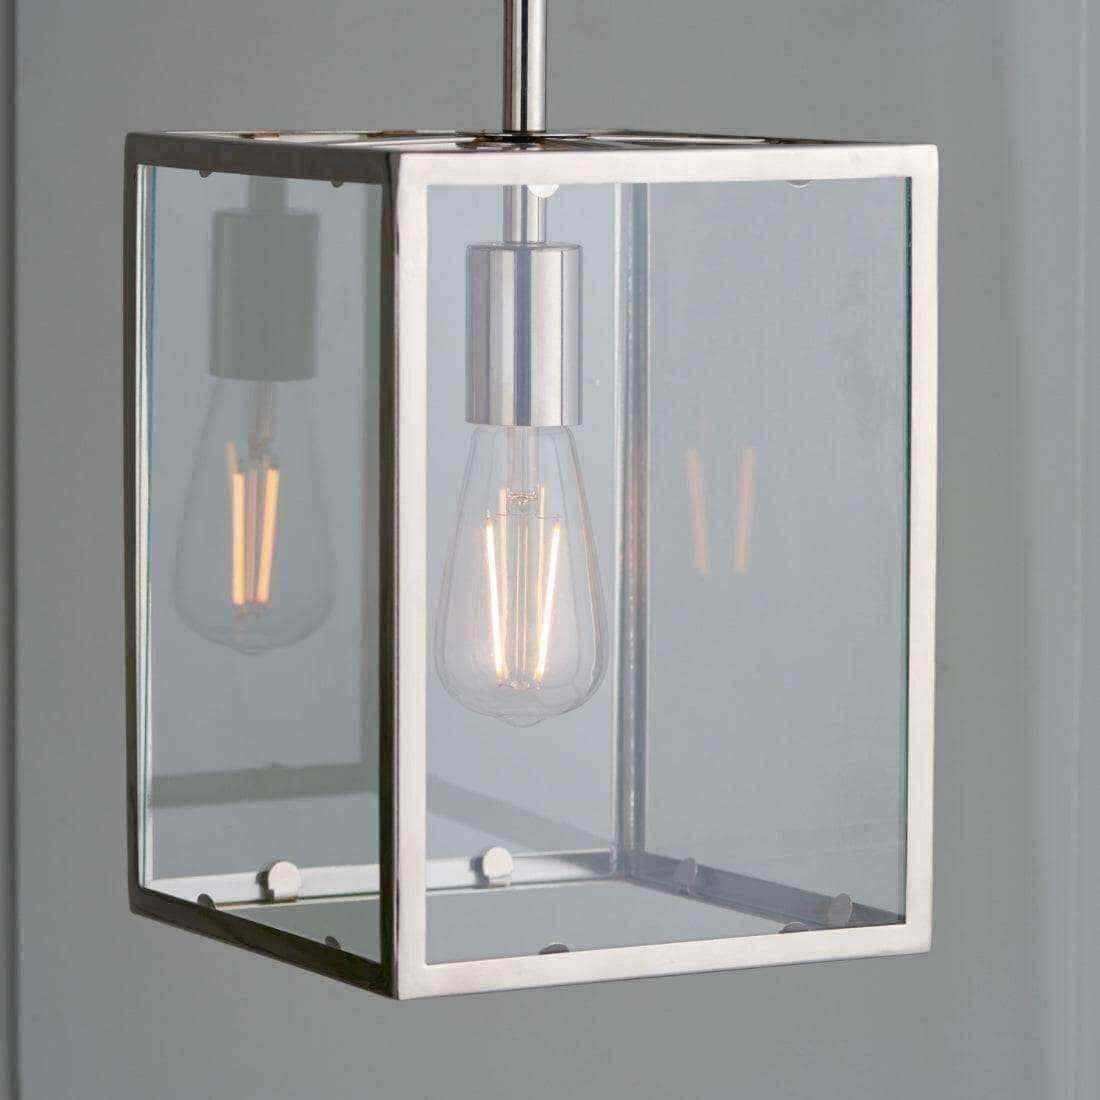 Polished Nickel Plated Box Pendant Light - The Farthing